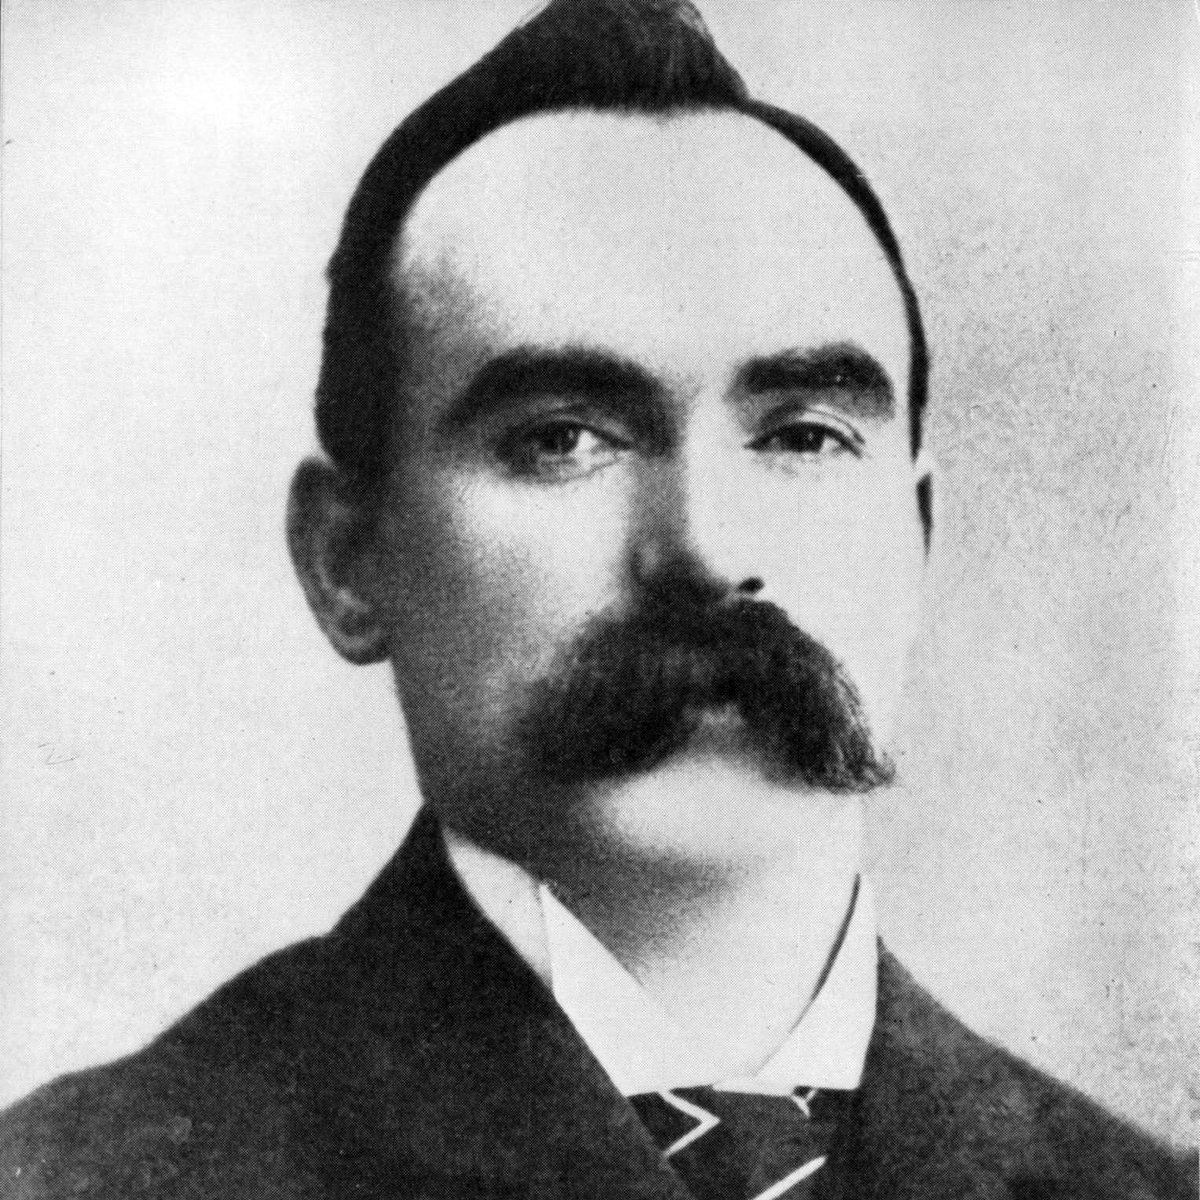 "In every enemy of Tyranny we recognise a brother, wherever be his birthplace; in every enemy of Freedom we also recognise our enemy, though he were as Irish as our hills."James Connolly